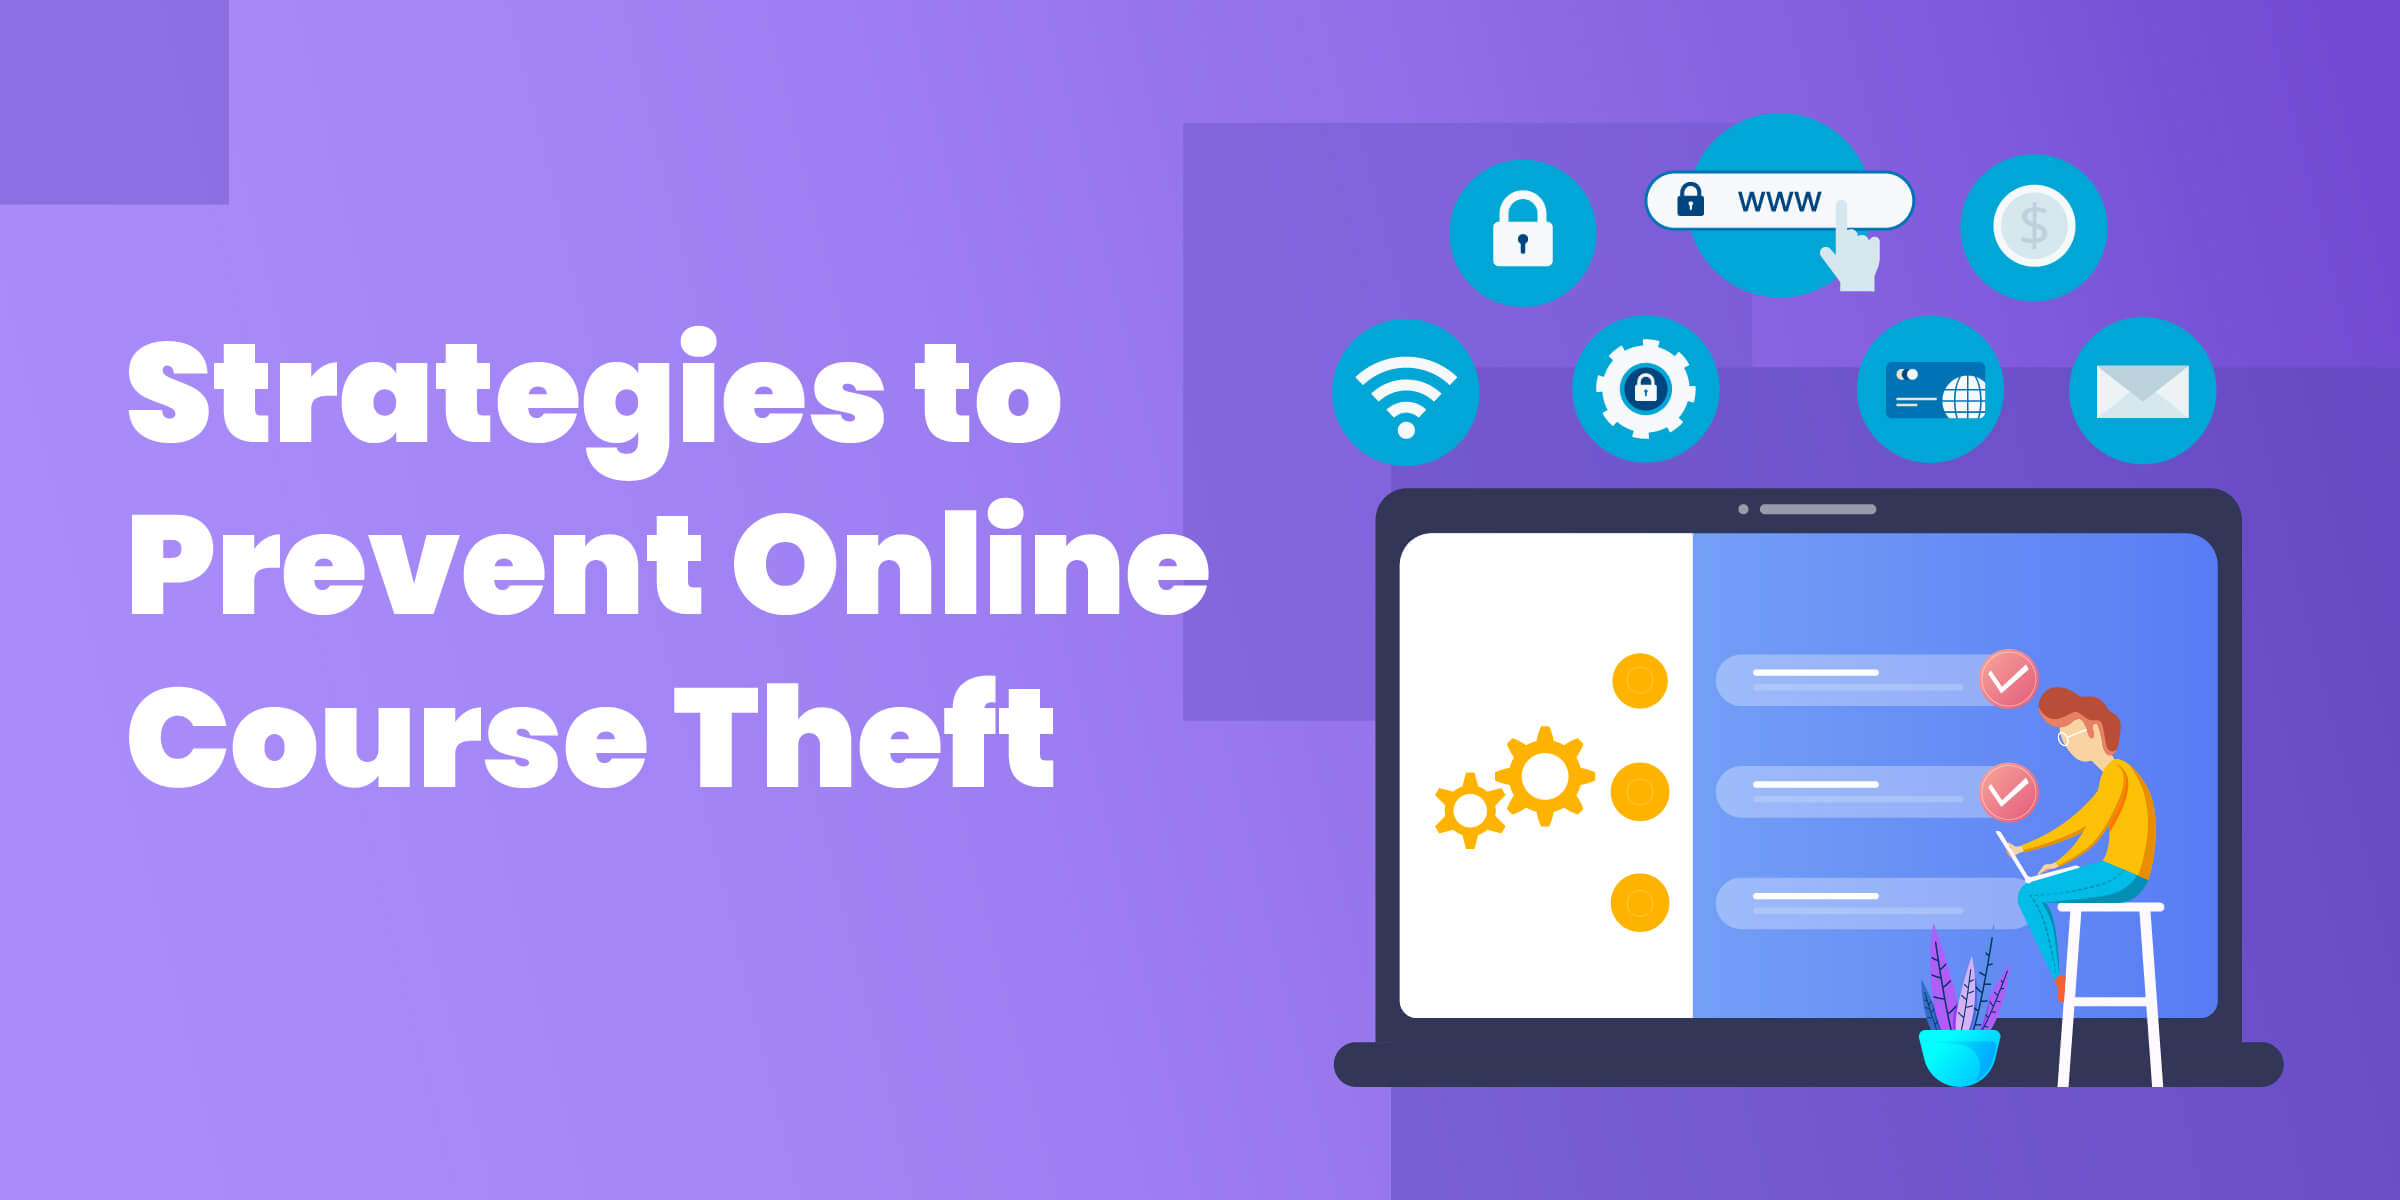 Strategies to Prevent Online Course Theft